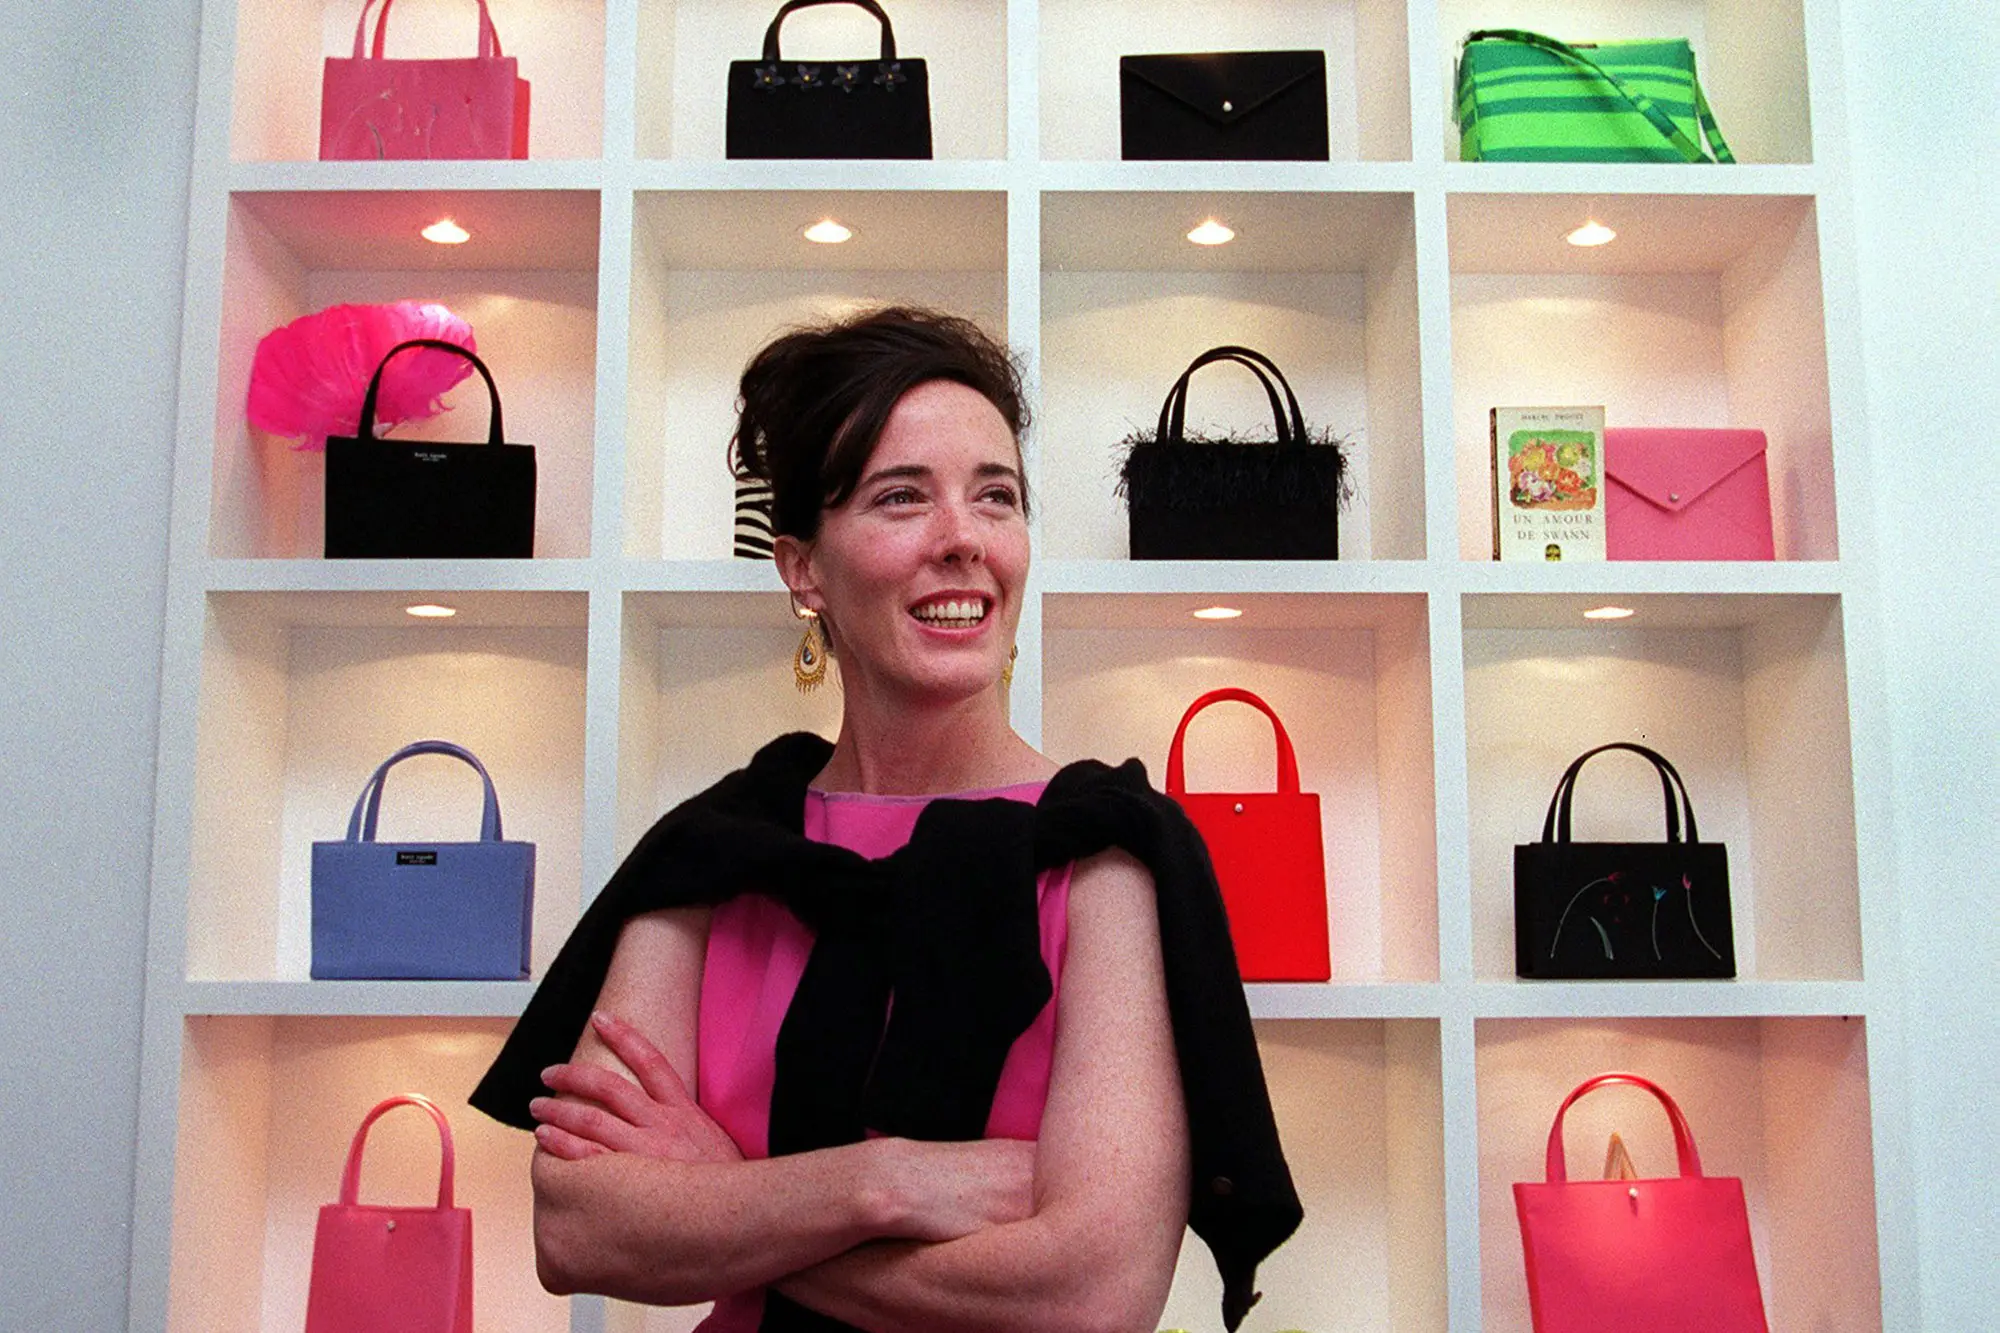 Ulta apologizes for 'insensitive' email about late designer Kate Spade